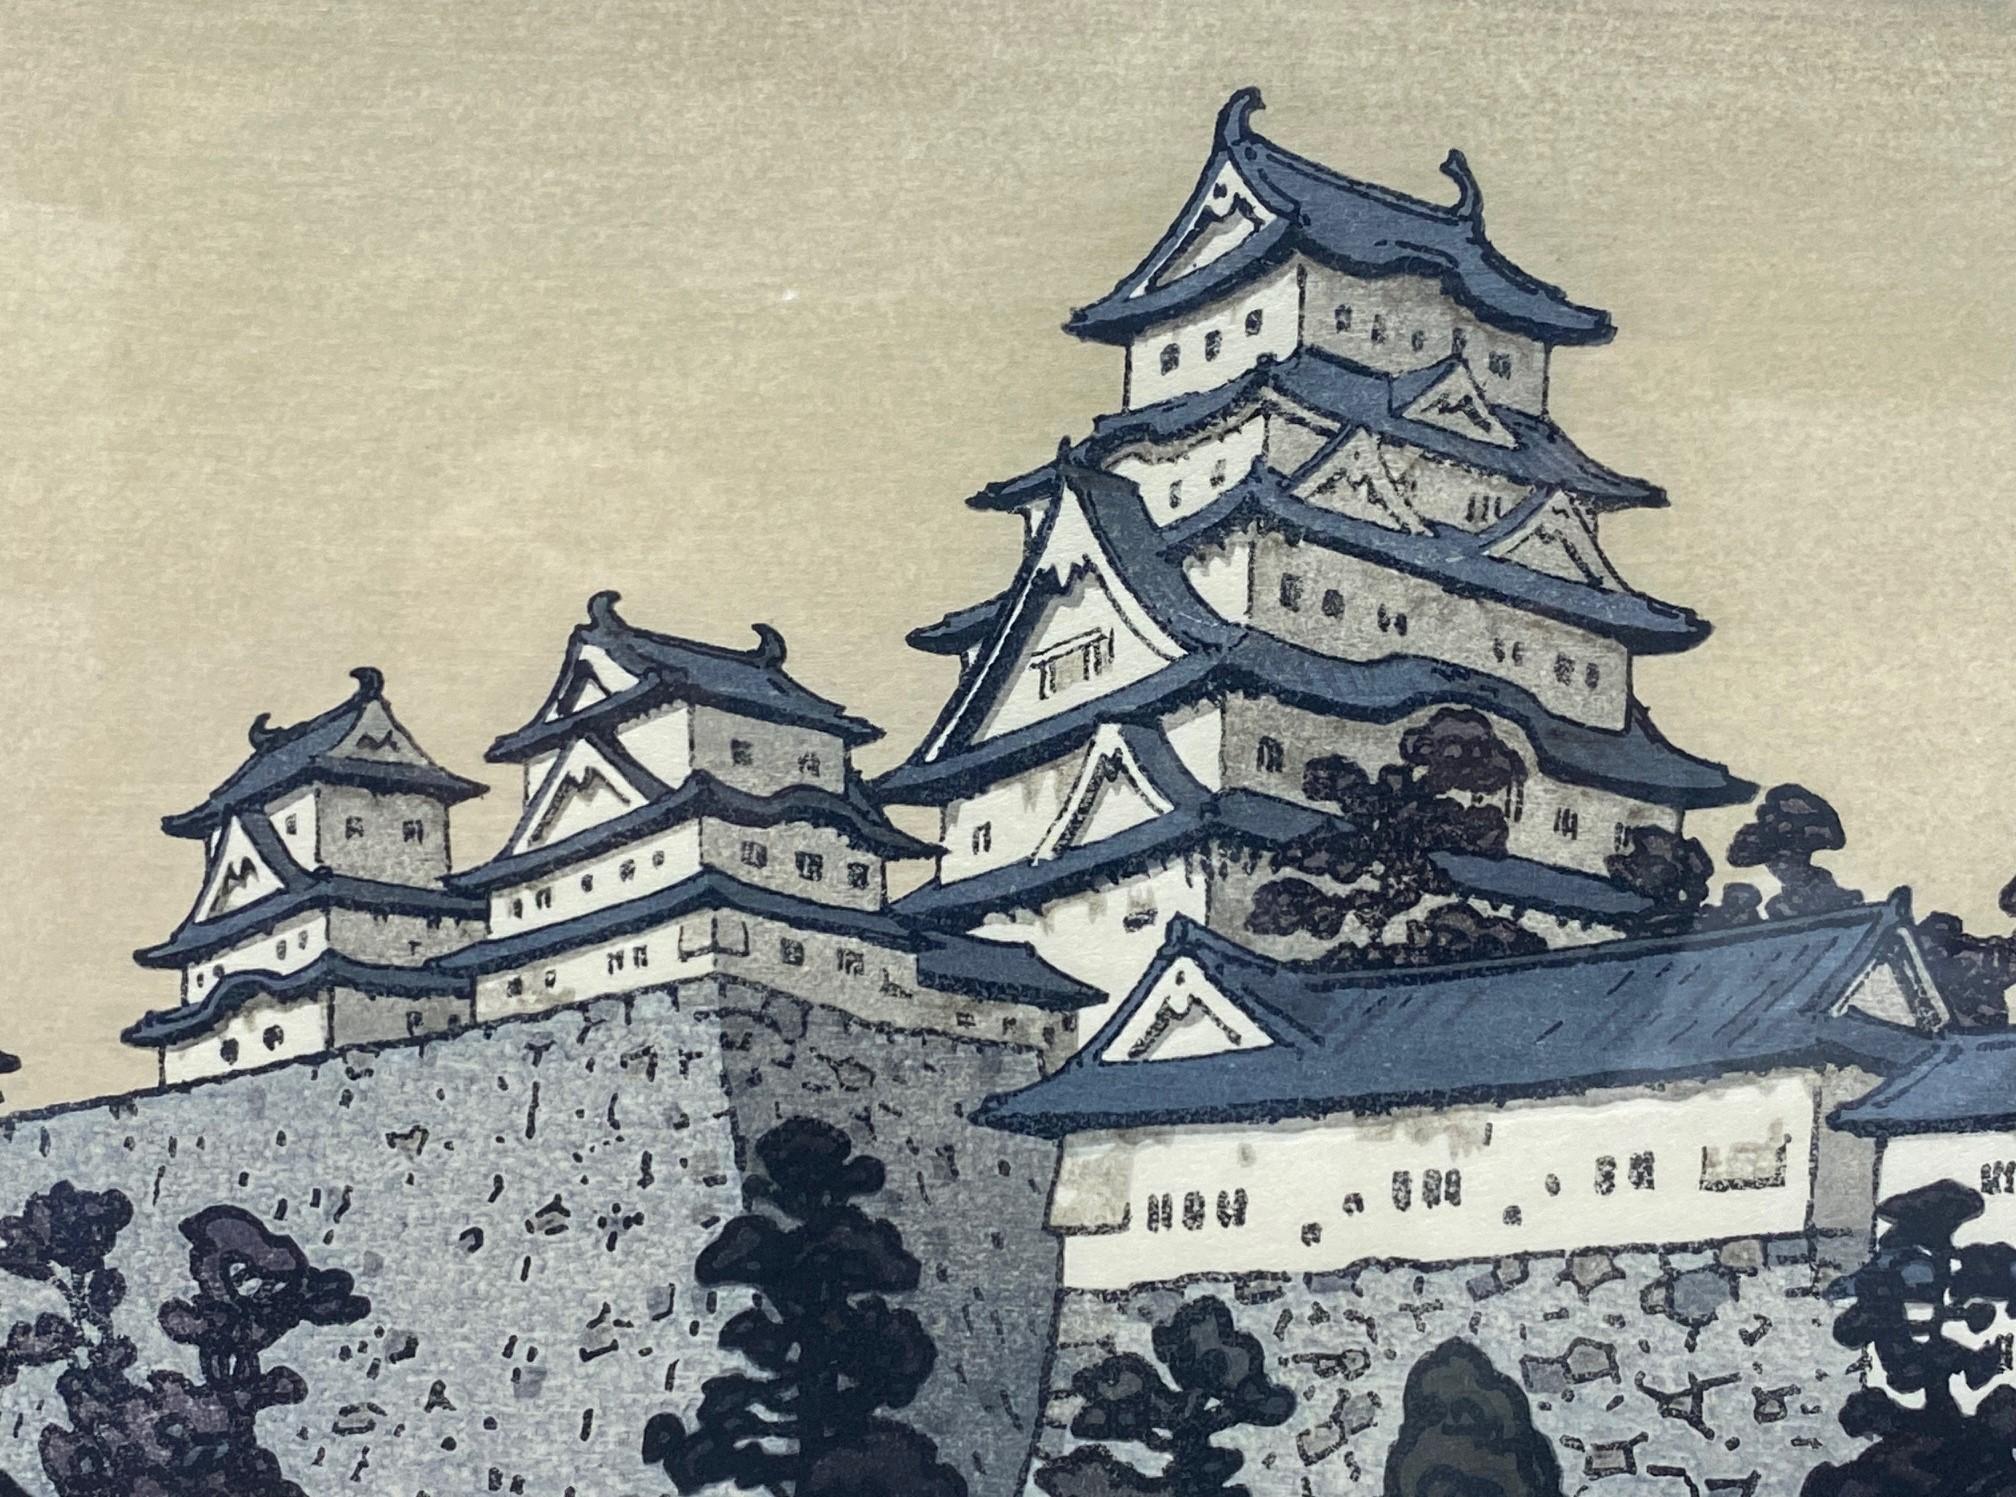 Toshi Yoshida Signed Japanese Showa Woodblock Print Oshiro Castle at Himeji In Good Condition For Sale In Studio City, CA